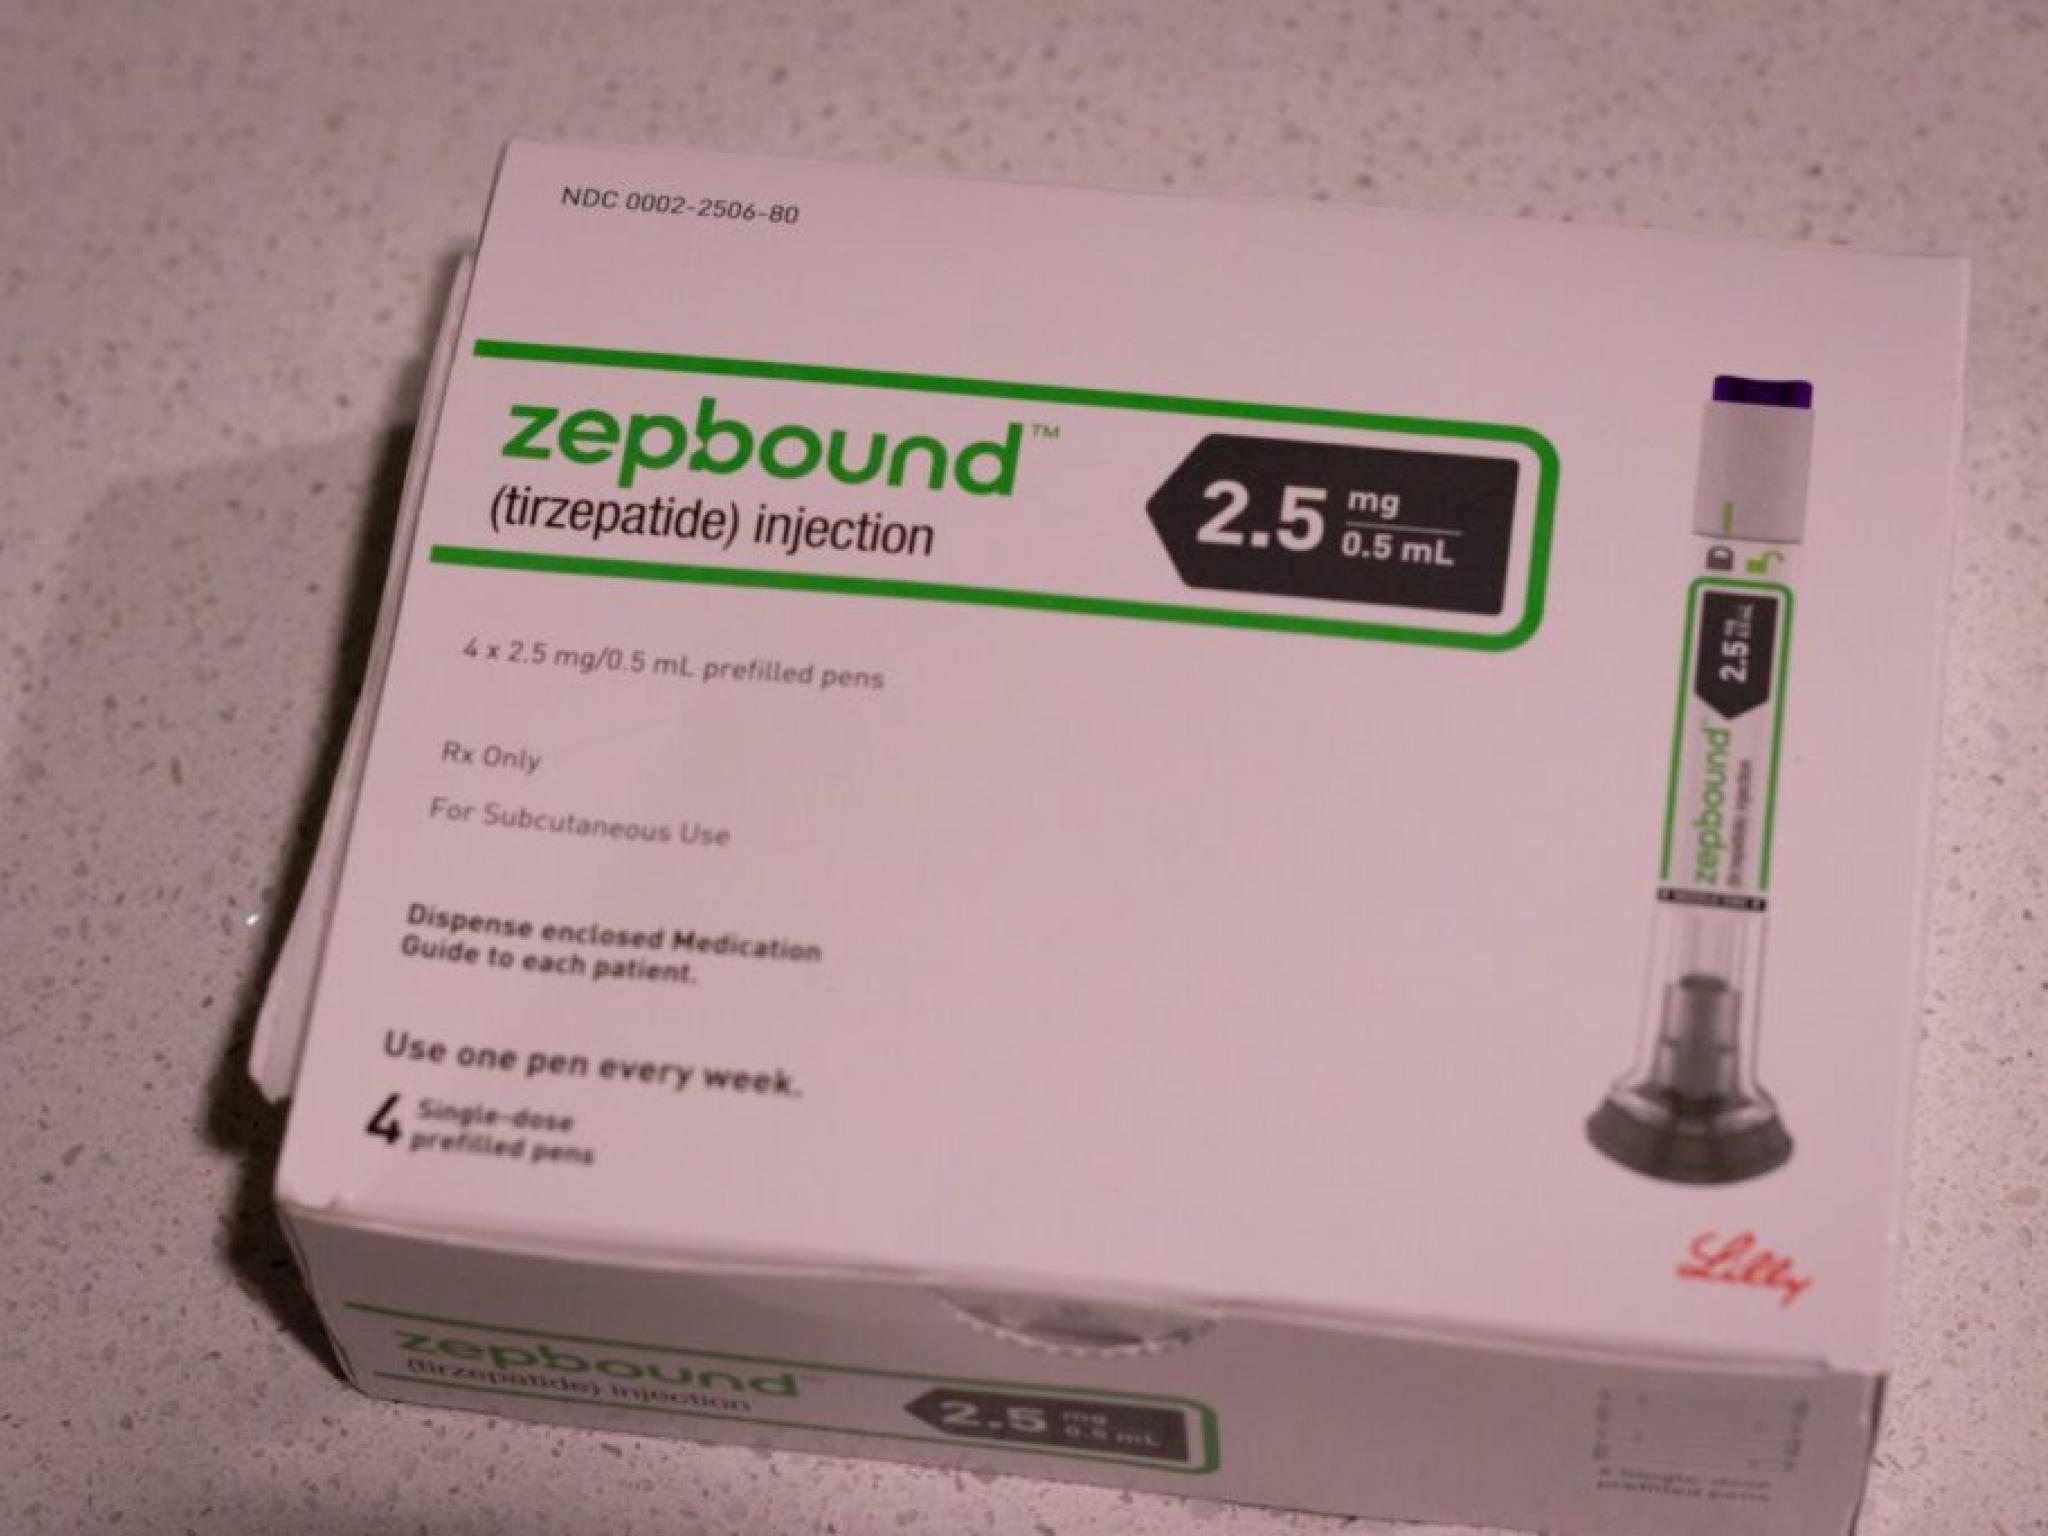  eli-lilly-expands-fight-against-counterfeit-obesity-drug-zepbound-with-new-legal-actions 